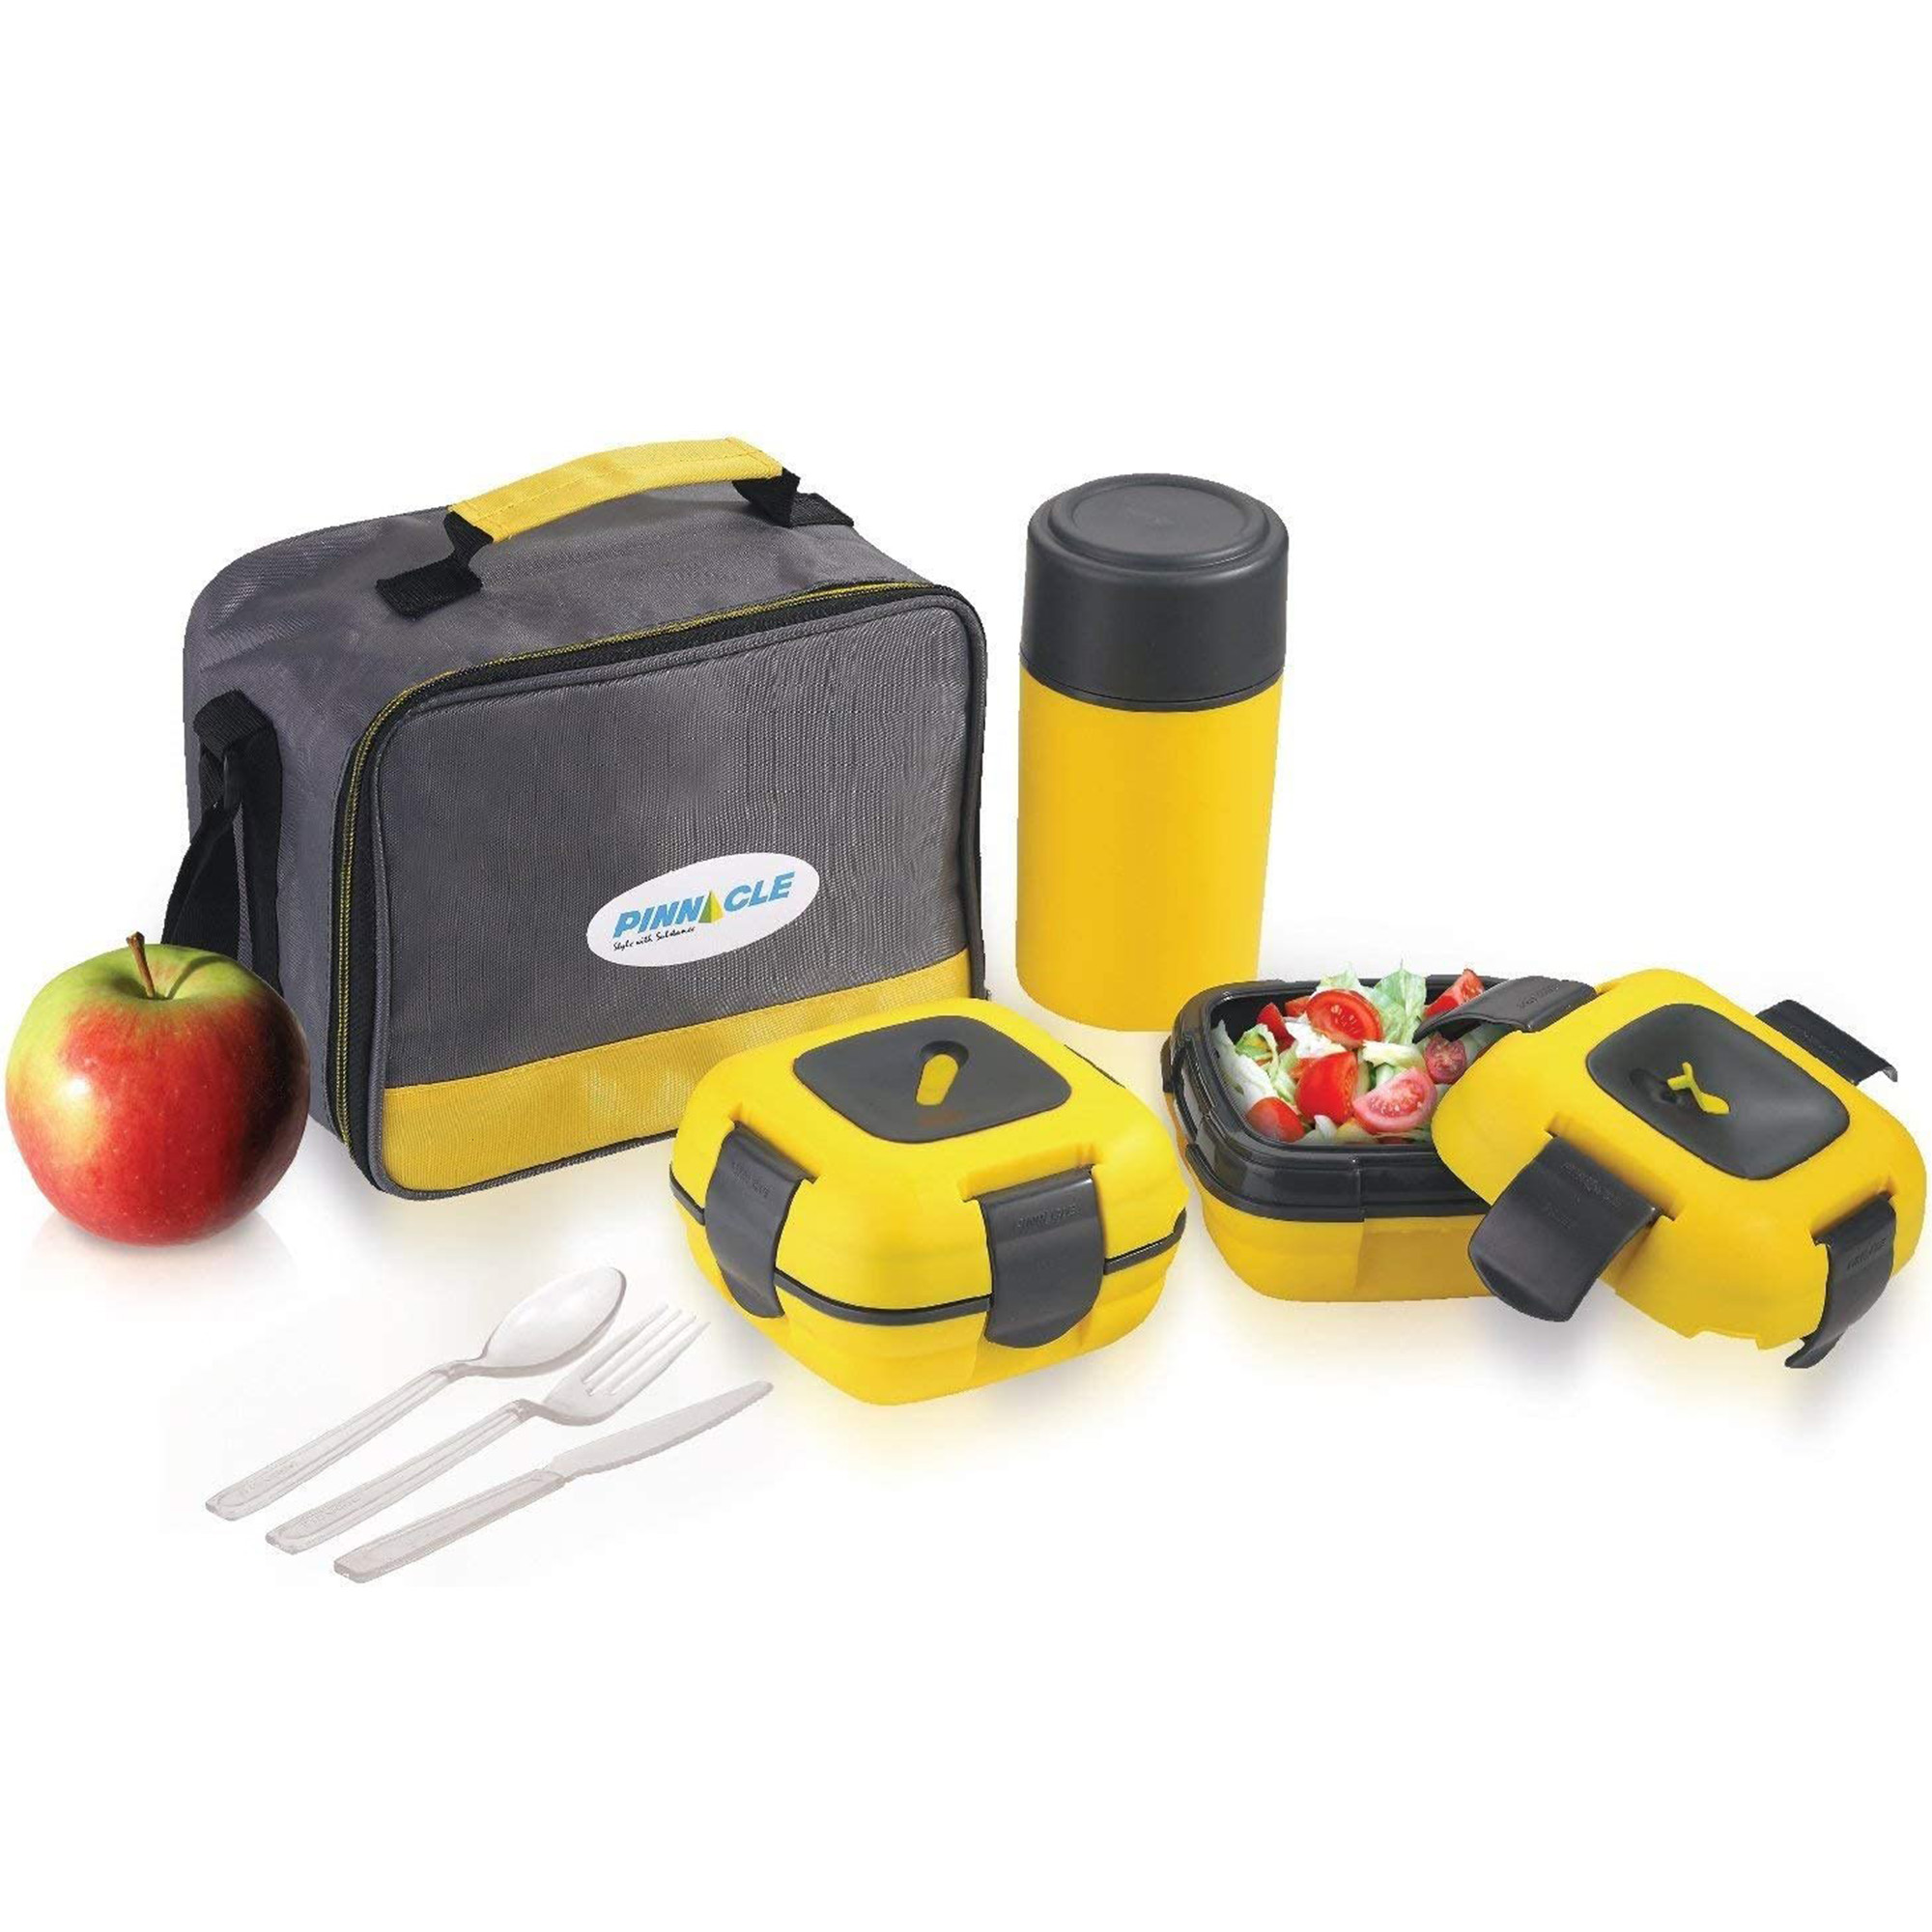 Pinnacle Thermoware Thermal Lunch Box Set Lunch Containers for Adults & Kids, Yellow - image 1 of 9